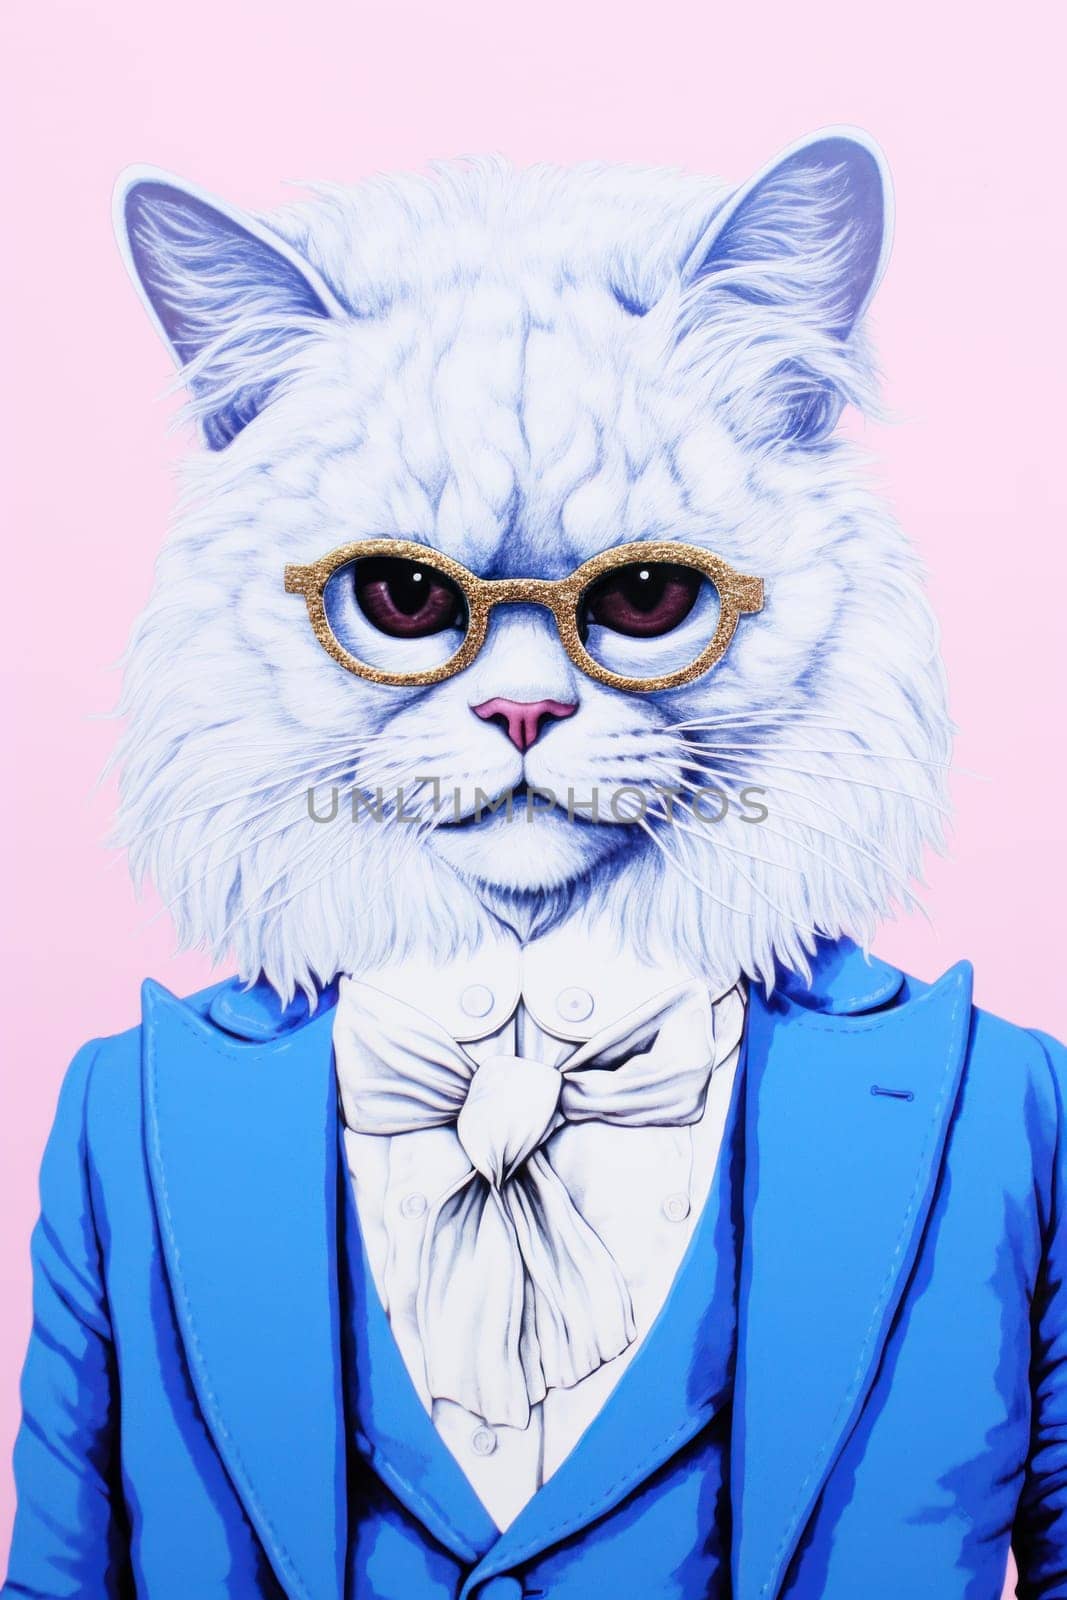 A white cat wearing a blue suit and glasses